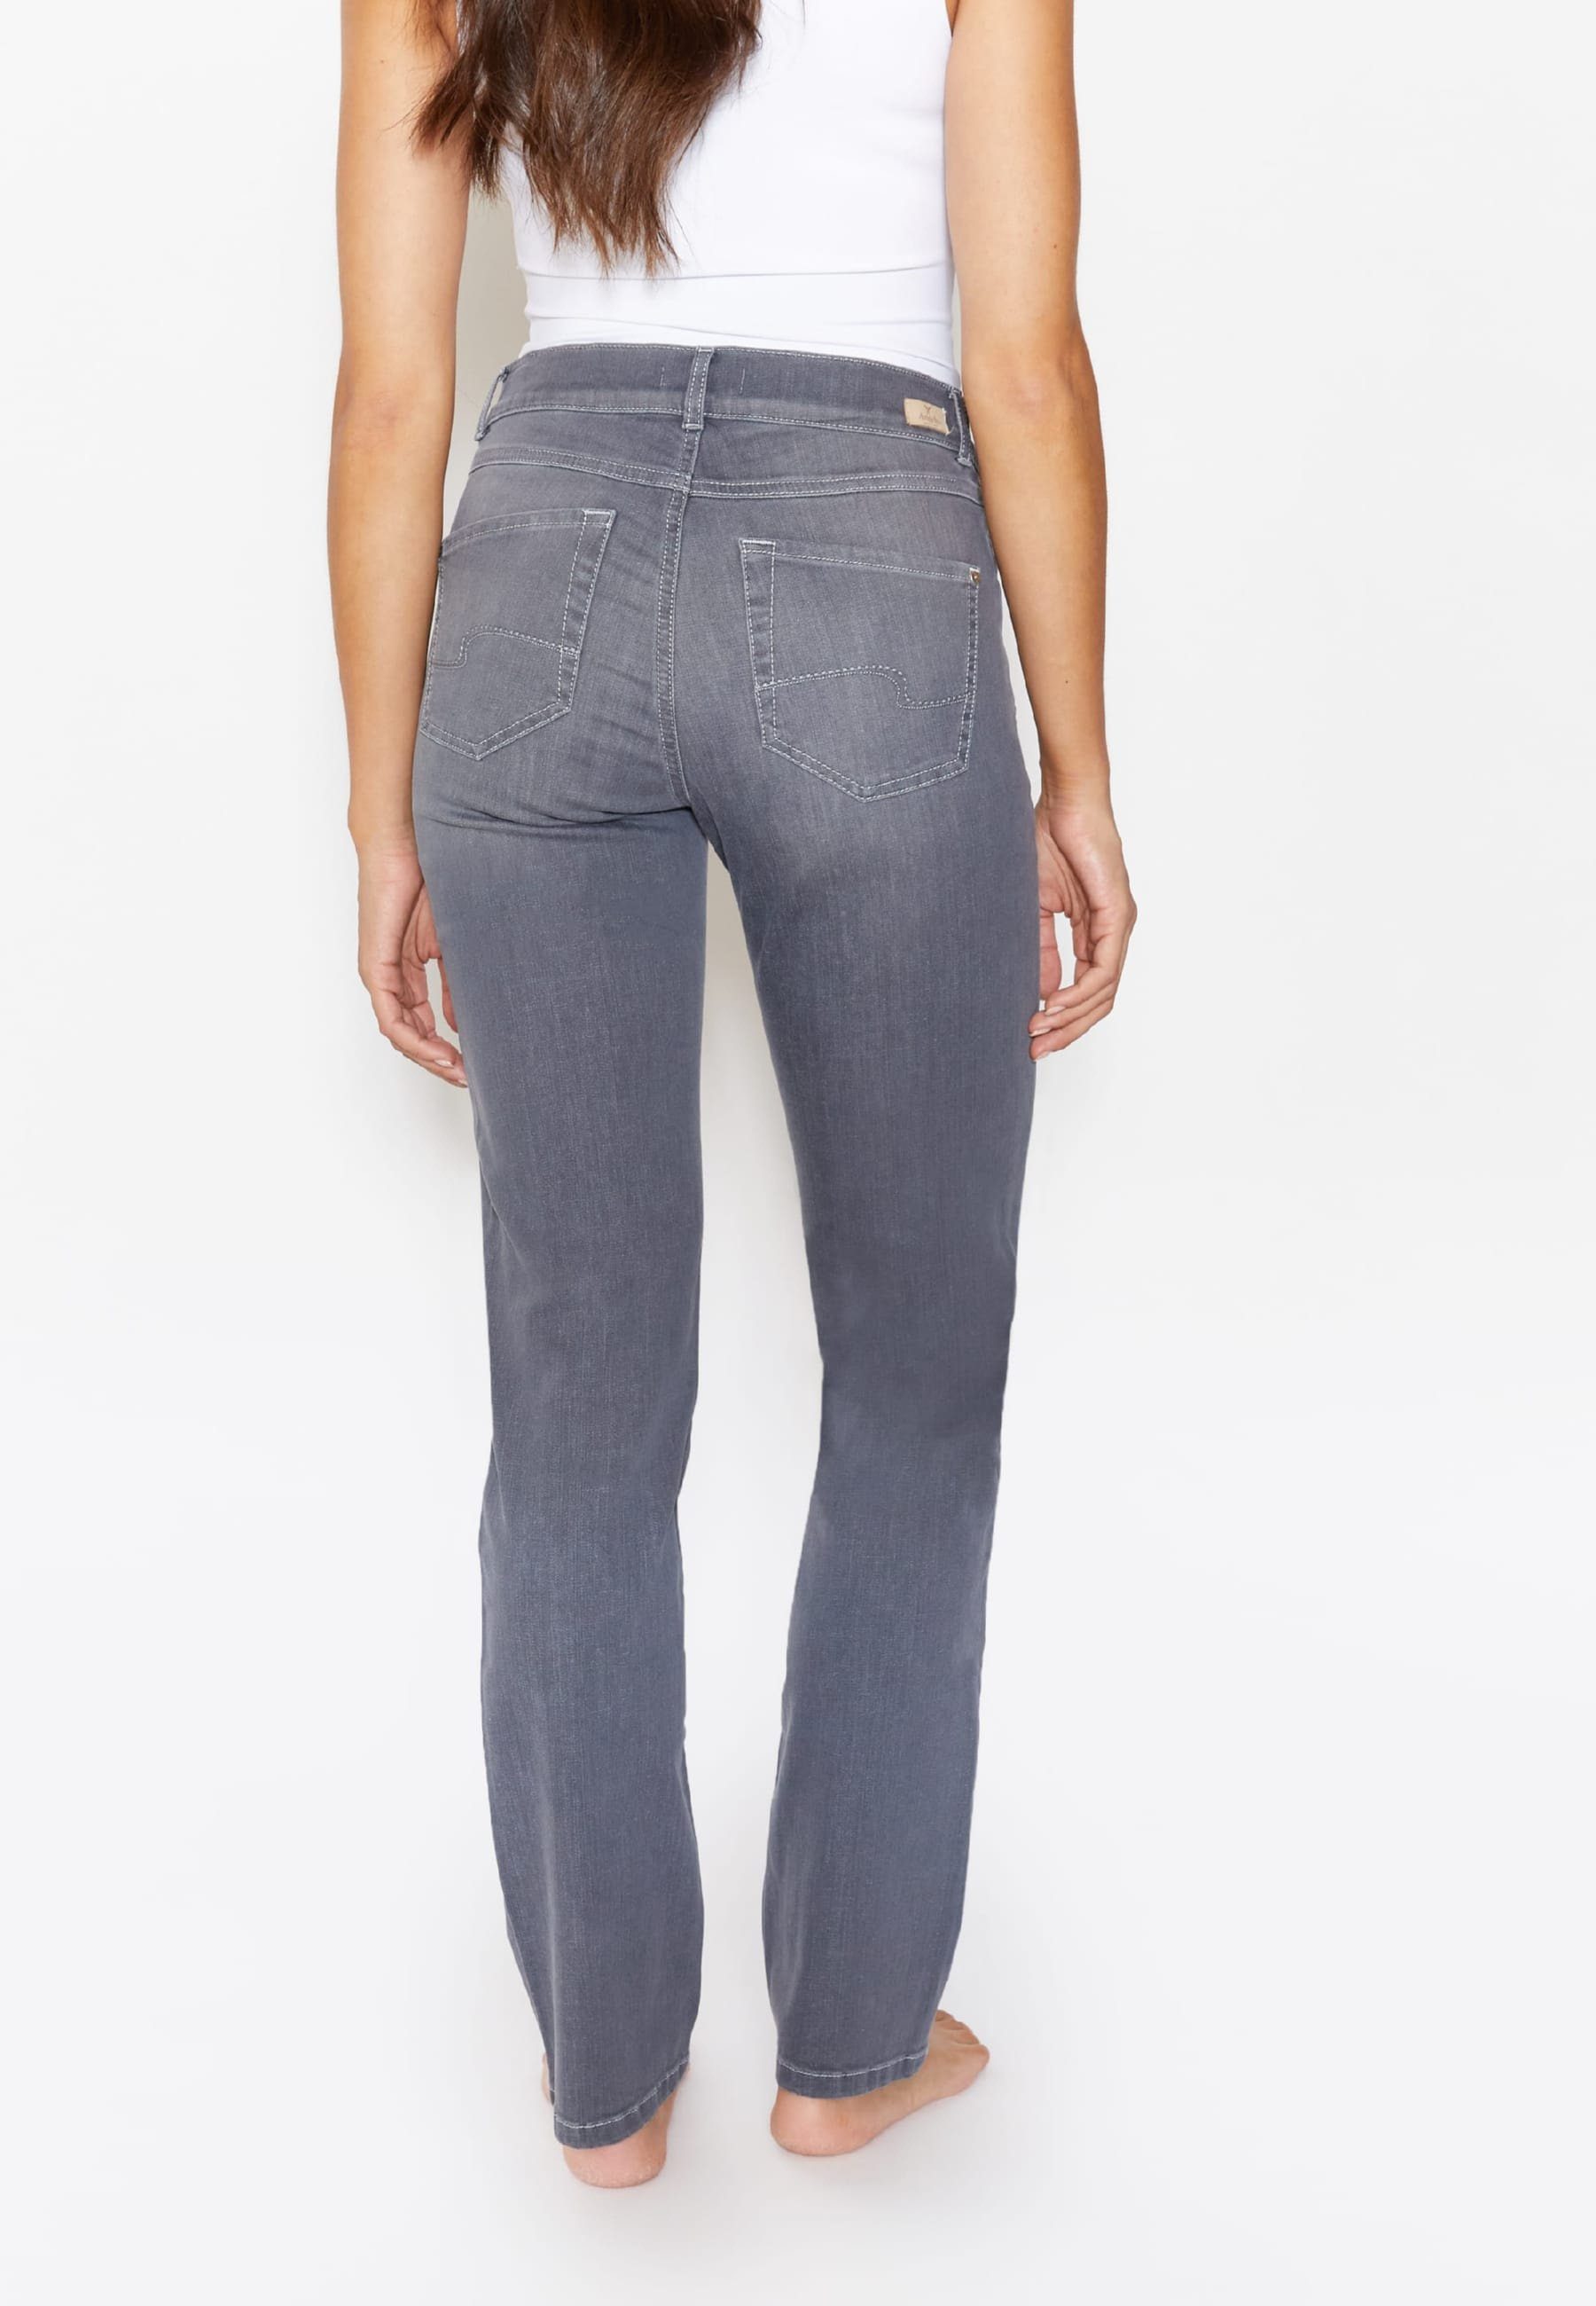 5-Pocket-Jeans 2.0 ANGELS Dolly grau Straight-Jeans